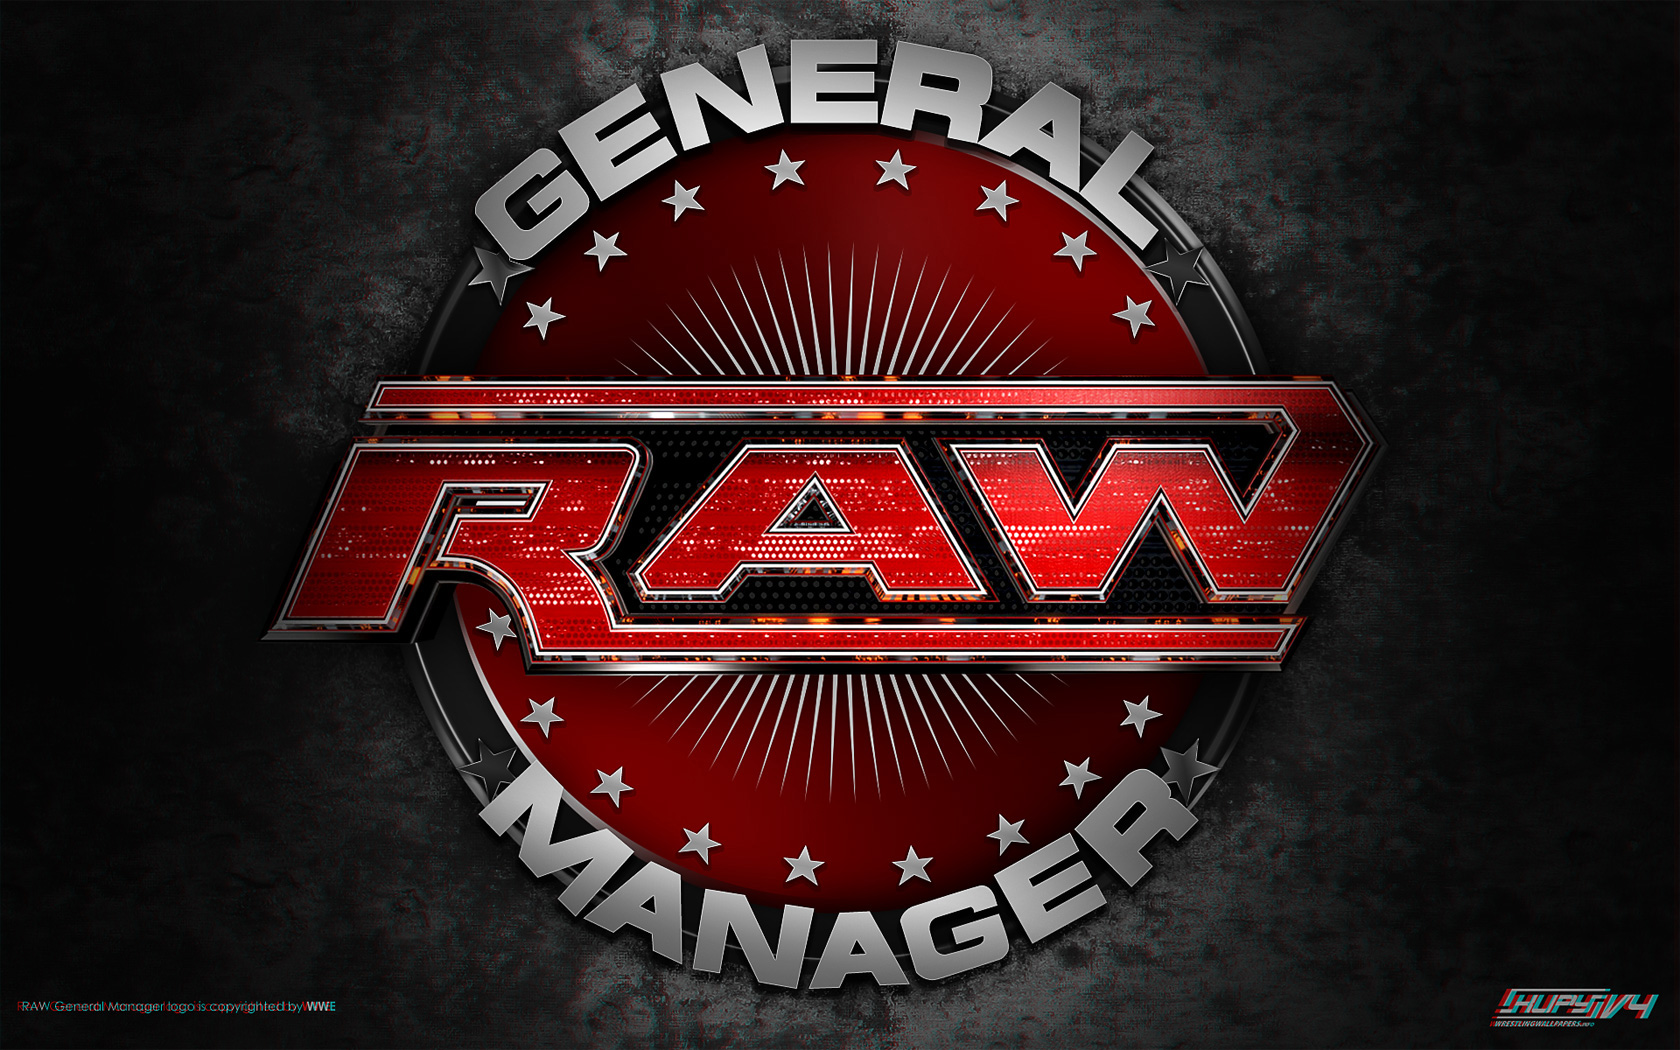 Posted in All Designs, RAW Anonymous GM, WWE Raw, Wrestling Wallpapers